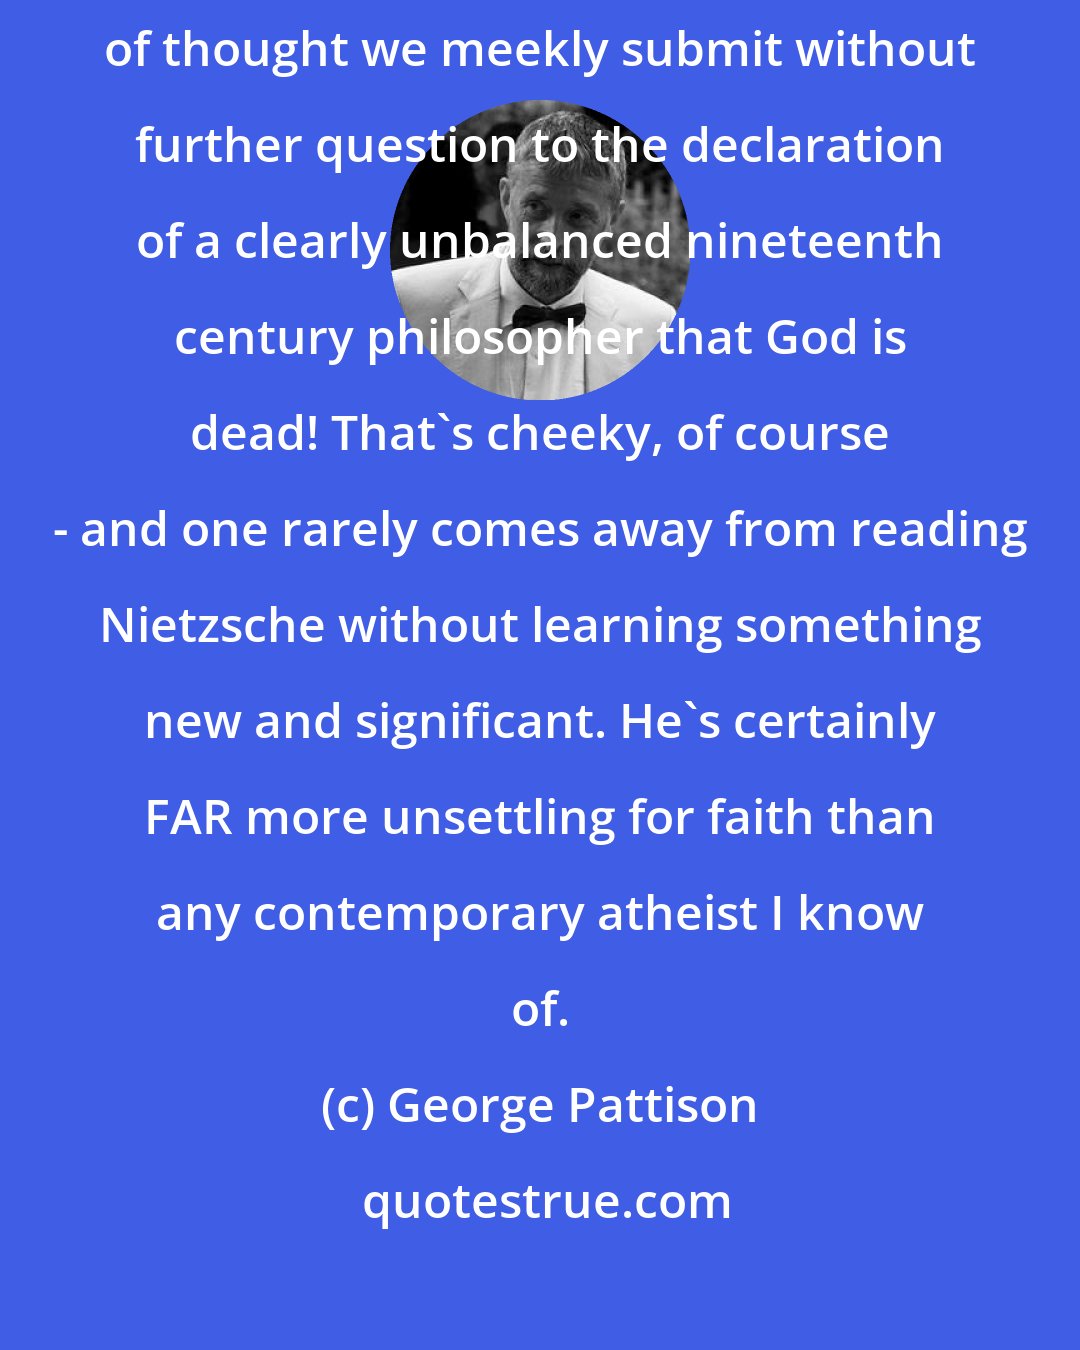 George Pattison: It's strange that in an age when we pride ourselves on our independence of thought we meekly submit without further question to the declaration of a clearly unbalanced nineteenth century philosopher that God is dead! That's cheeky, of course - and one rarely comes away from reading Nietzsche without learning something new and significant. He's certainly FAR more unsettling for faith than any contemporary atheist I know of.